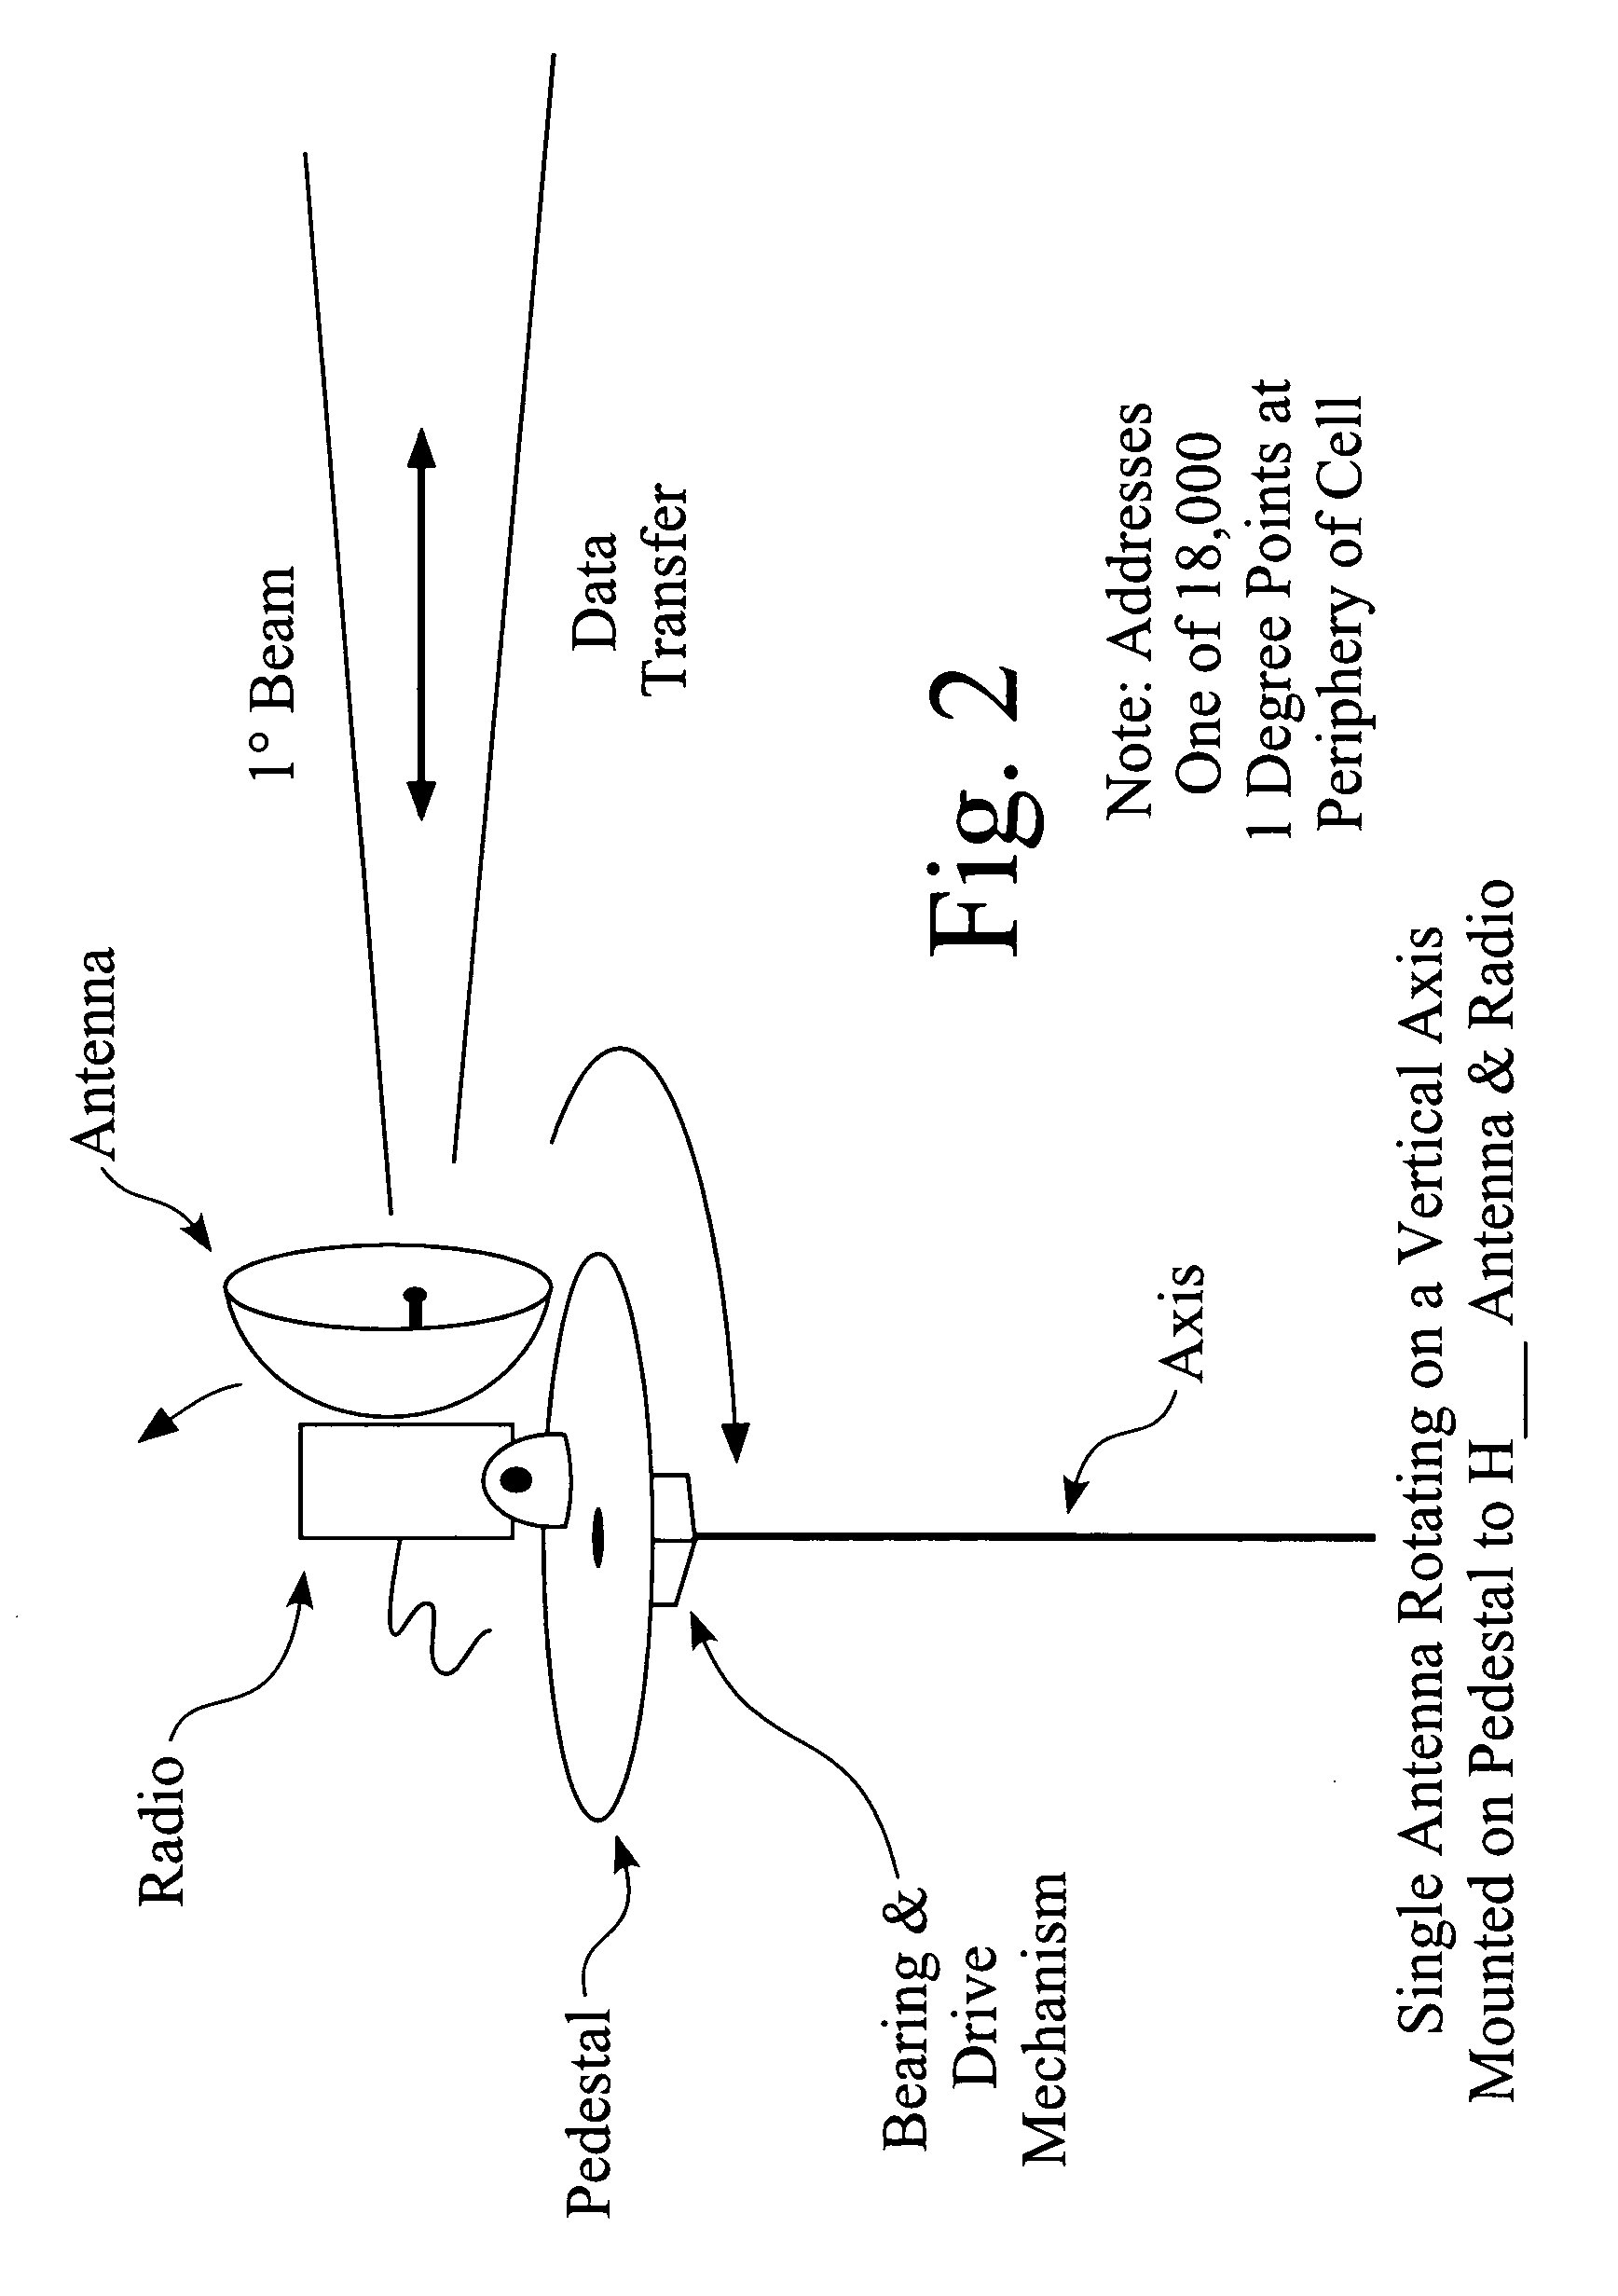 Multiple-point to multiple-point communication system